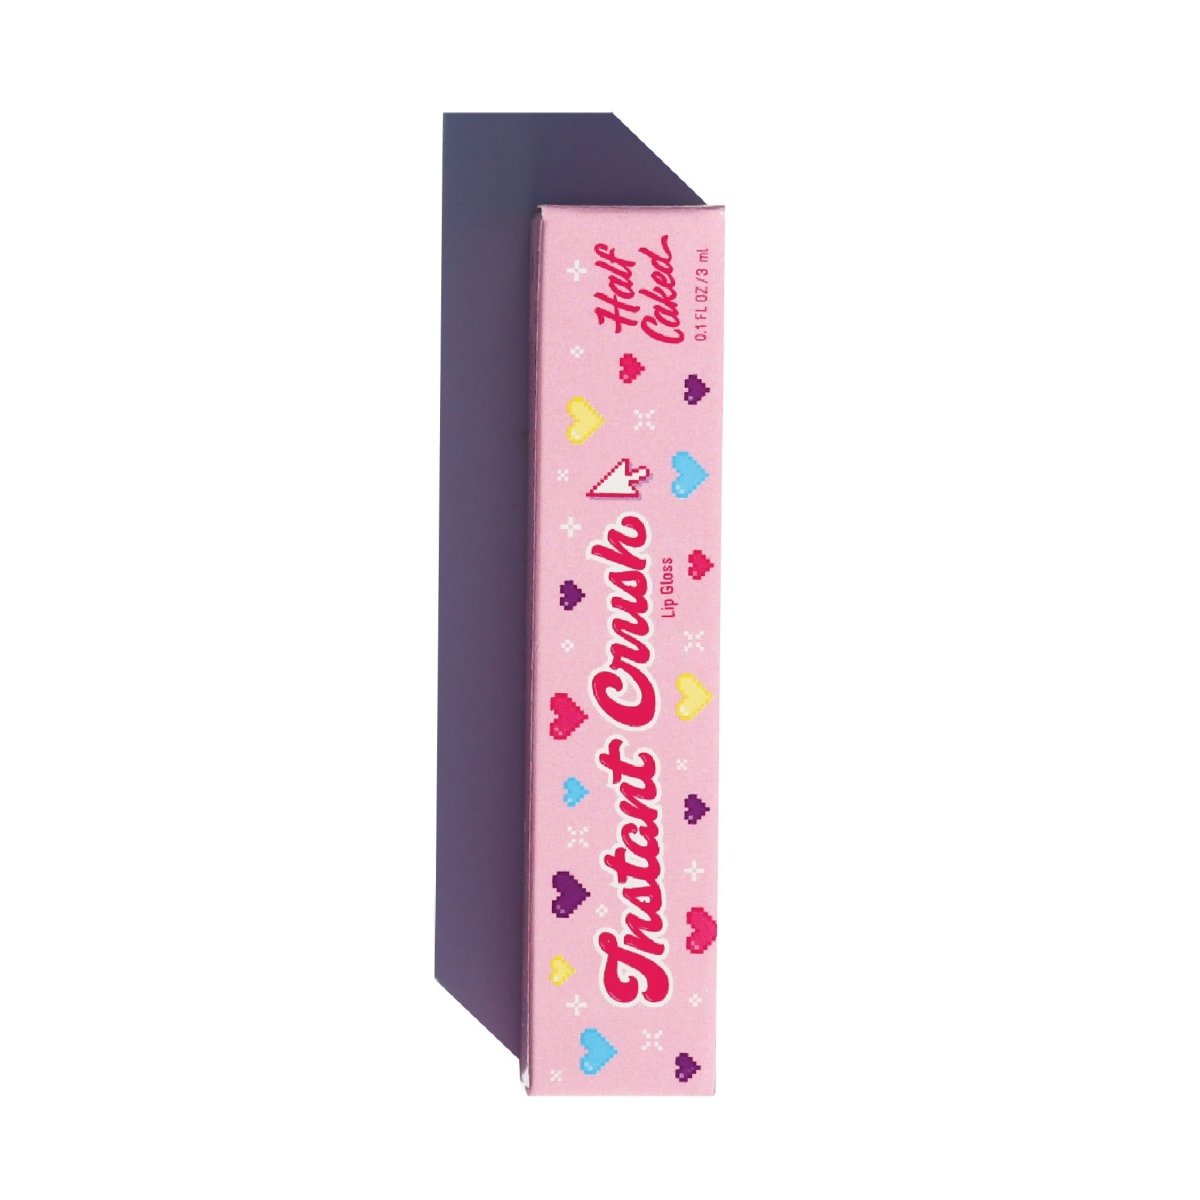 pink lip gloss box with instant crush on front - Glossy Set - Half Caked